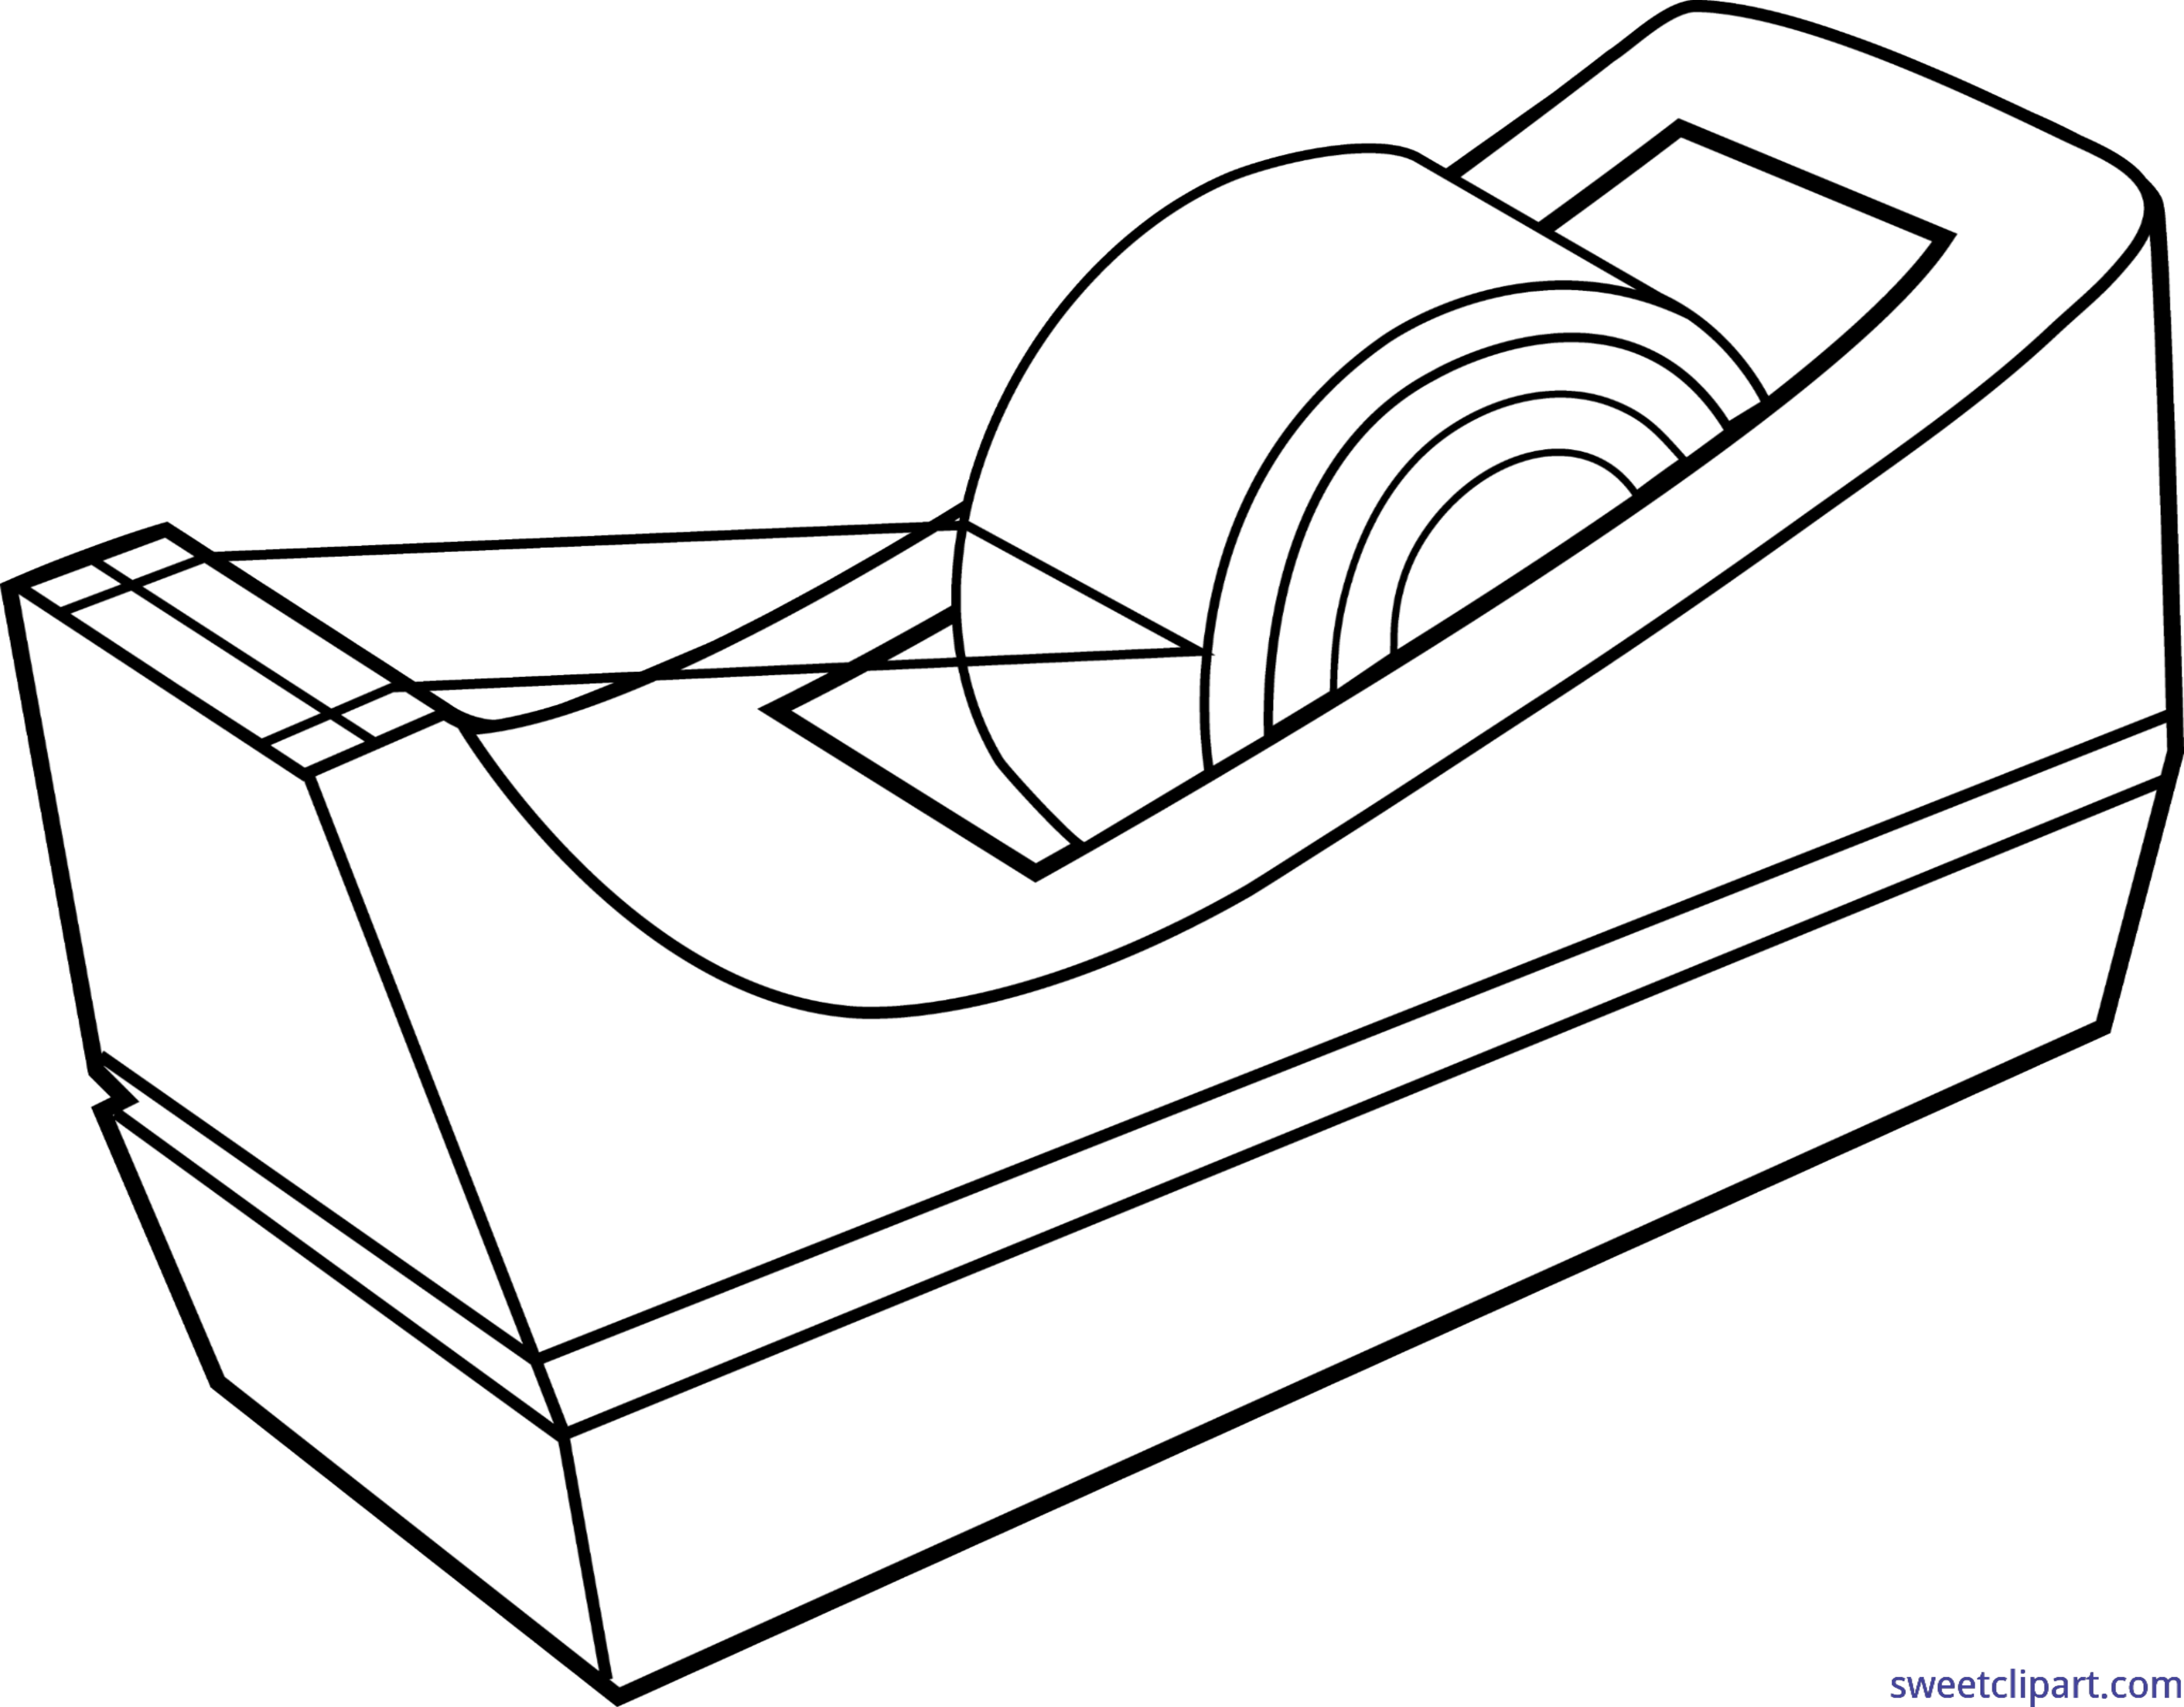 A Black And White Drawing Of A Tape Dispenser